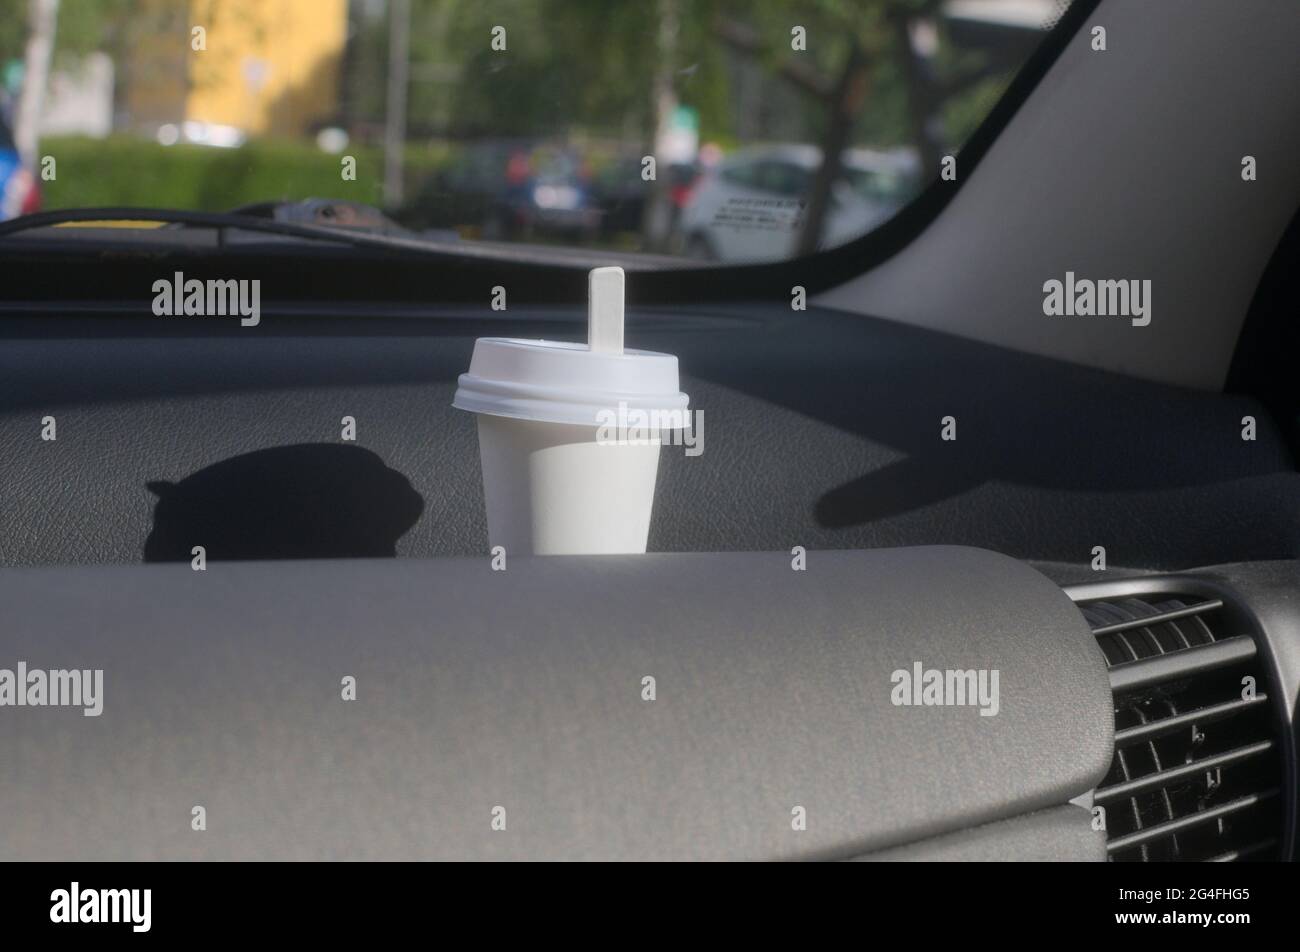 disposable cup of coffee on a car dashboard Stock Photo